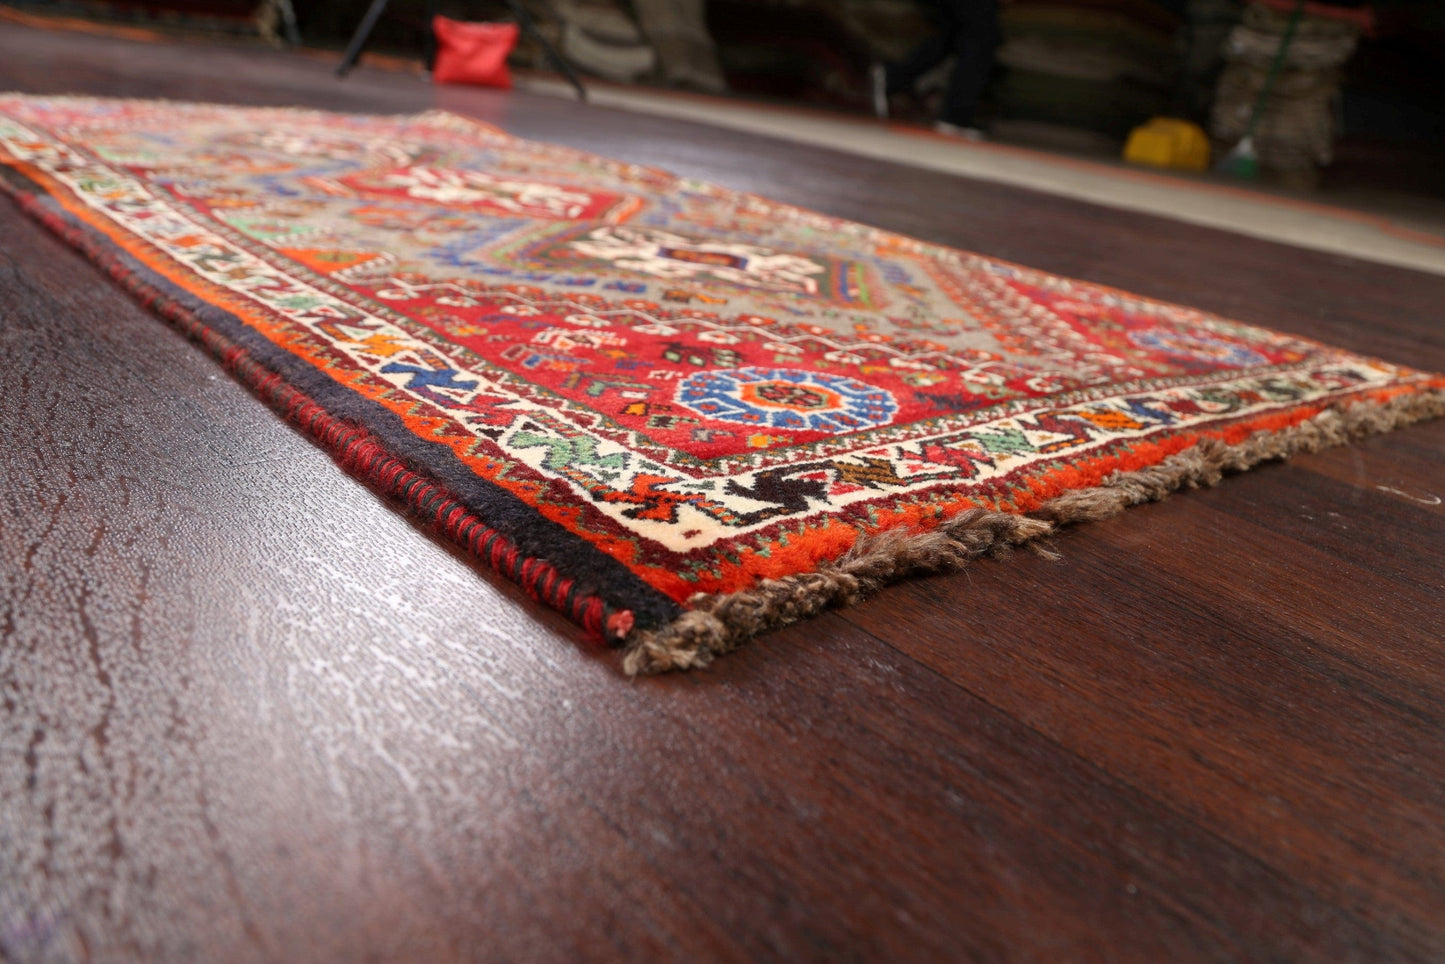 100% Vegetable Dye Abadeh Persian Area Rug 3x5